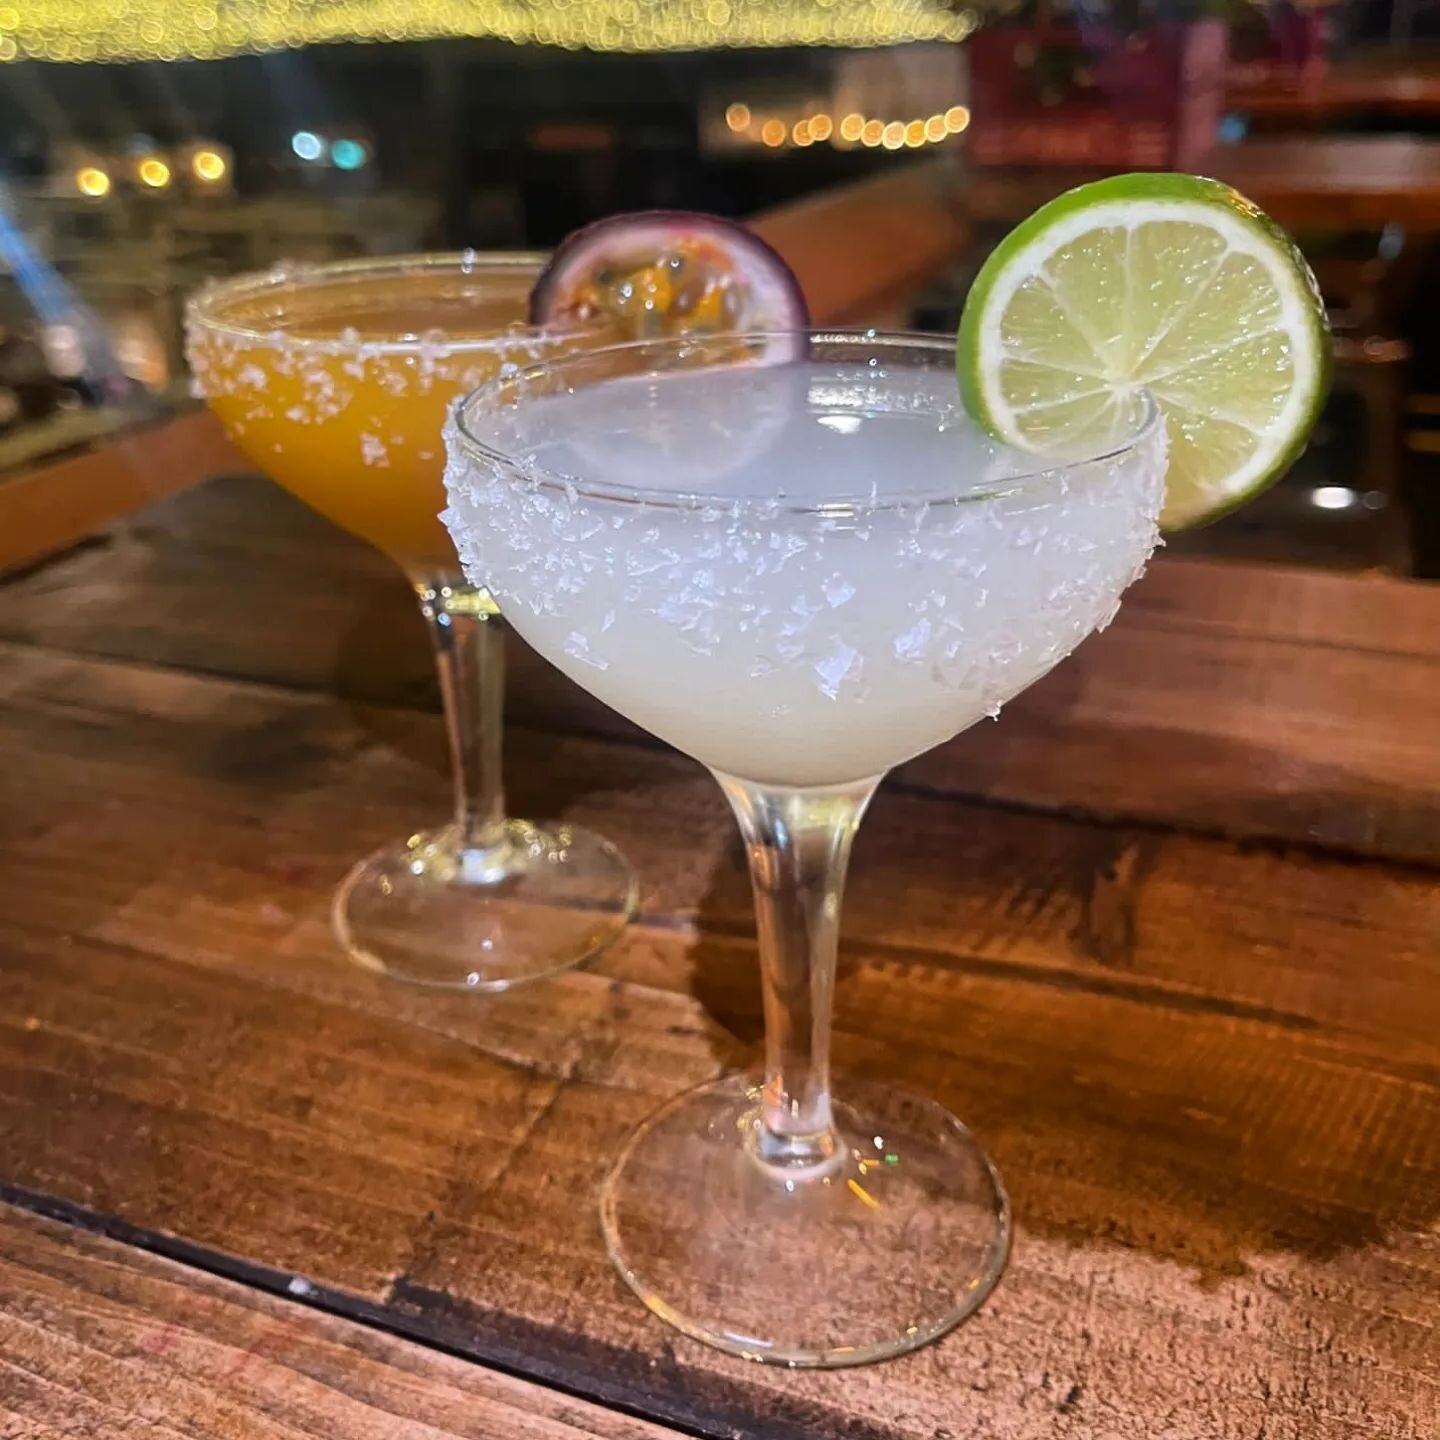 It's National Margarita Day 💚 &amp; your sign to treat yourself to our delicious margaritas! 

2-4-&pound;15 on these stunners:
☆Classic Margarita 
☆Passionfruit Margarita 

Book a table via the link in our bio or walk on in &amp; we'll do the rest 